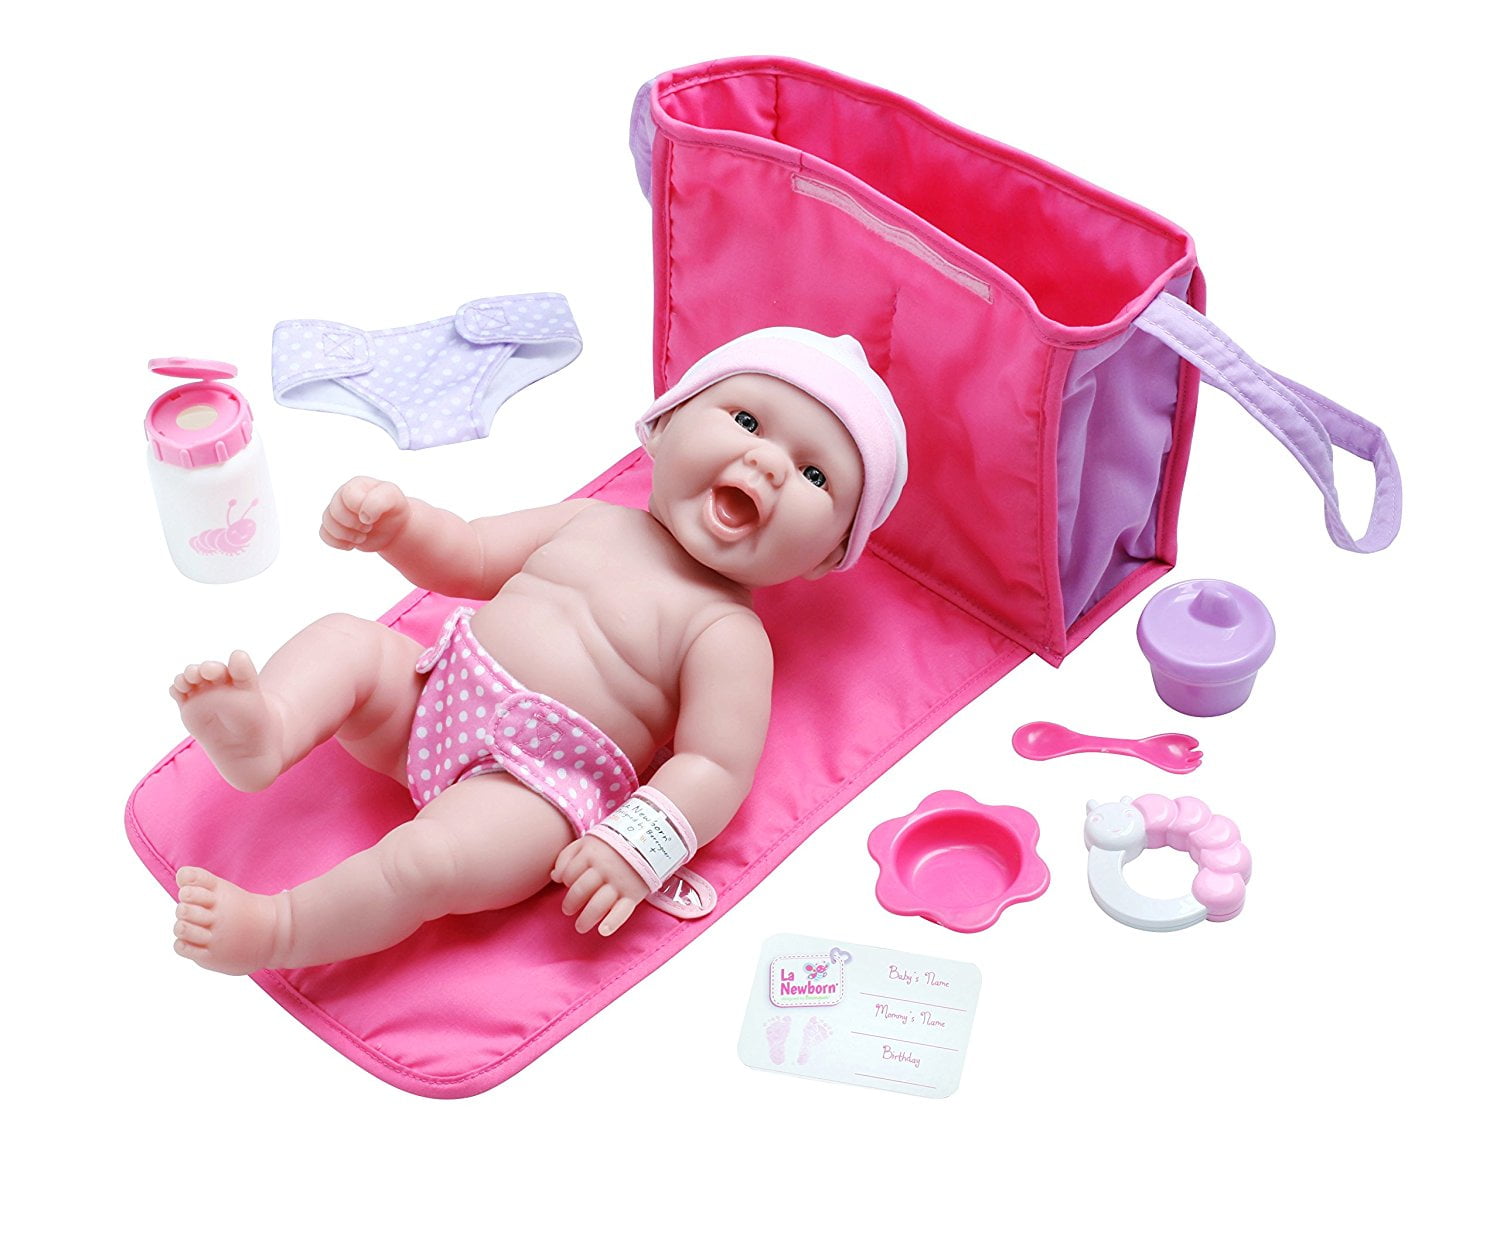 NEW Infant Jakks Baby Doll w/removable rubber diaper for Barbie accessories GIRL